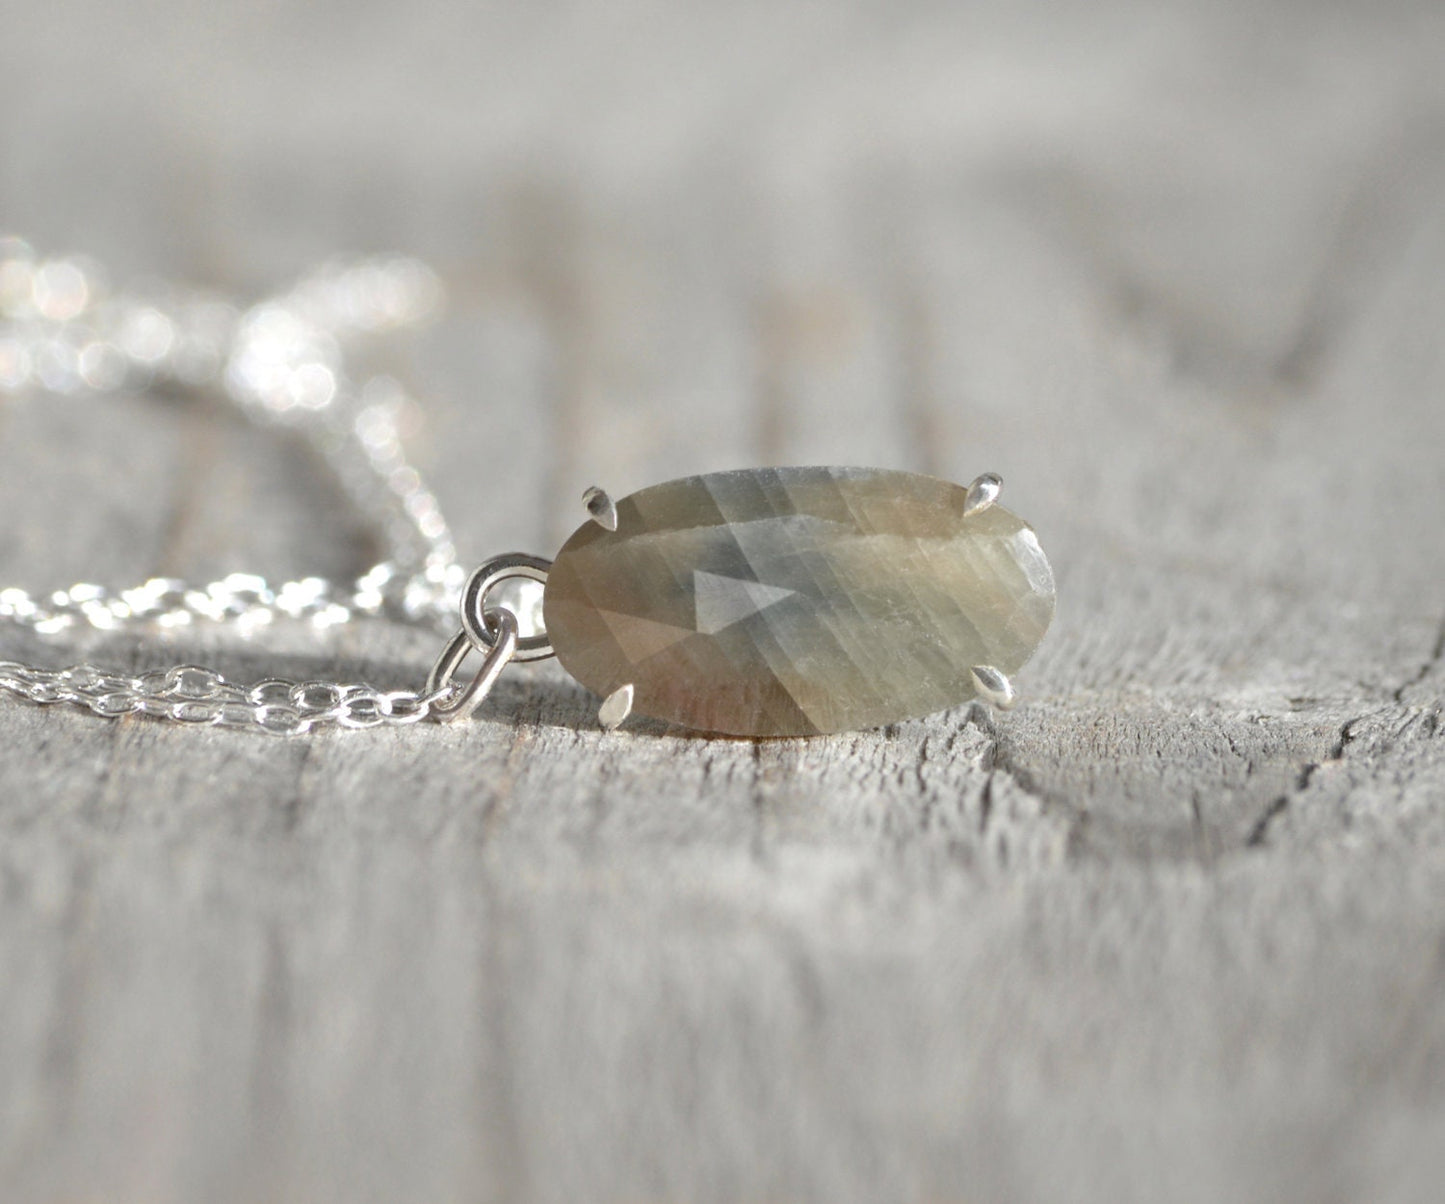 Bi-Coloured Sapphire Necklace in Sterling Silver, Oval Sapphire Neckace, September Birthstone Necklace